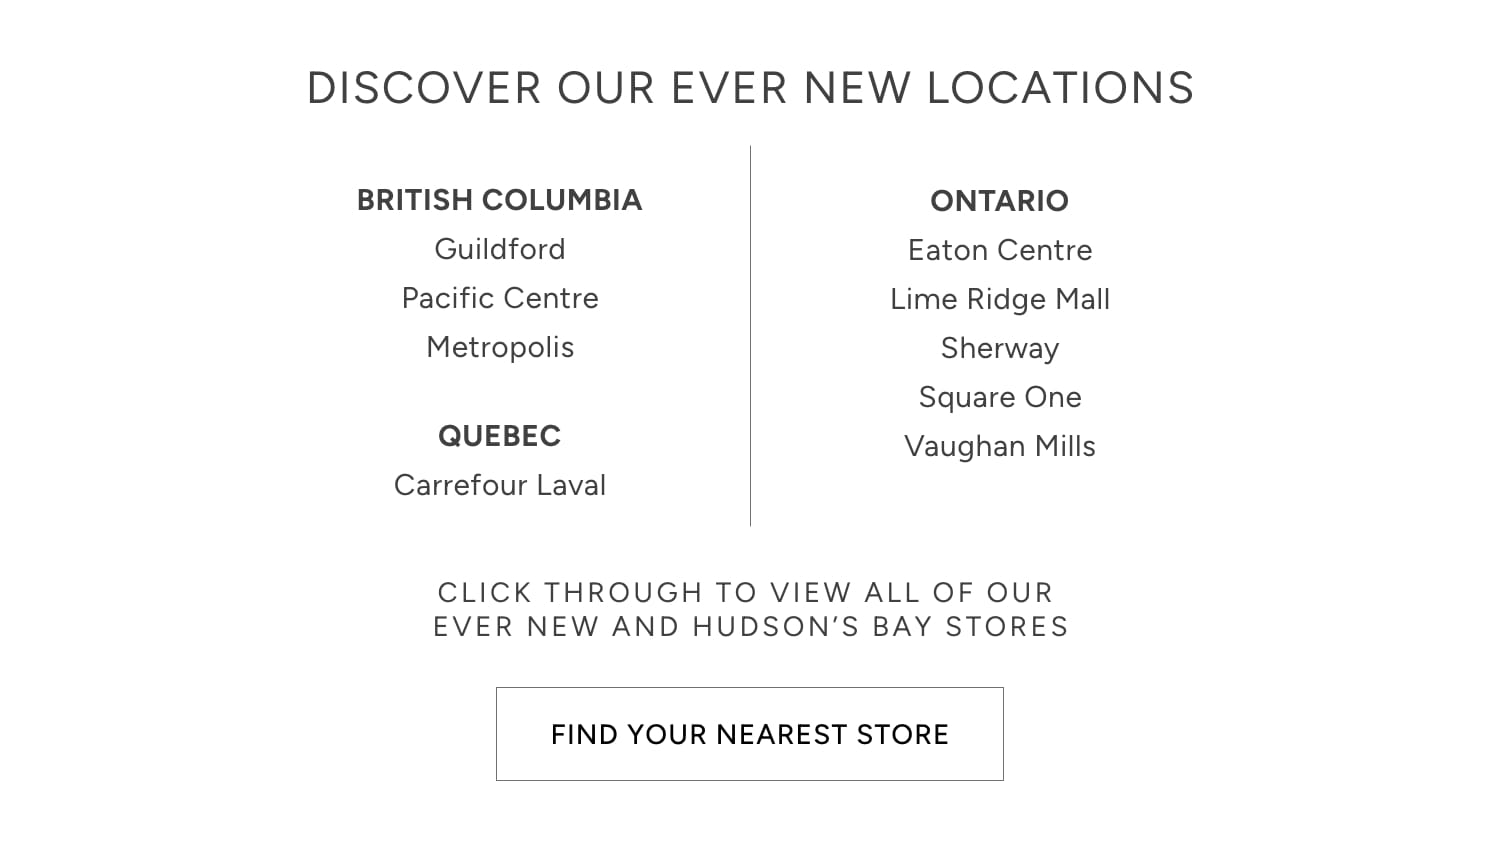 DISCOVER OUR EVER NEW LOCATIONS BRITISH COLUMBIA ONTARIO Guildford Eaton Centre Pacific Centre Lime Ridge Mall Metropolis Sherway Square One CLICK THROUGH TO VIEW ALL OF OUR EVER NEW AND HUDSON'S BAY STORES FIND YOUR NEAREST STORE 